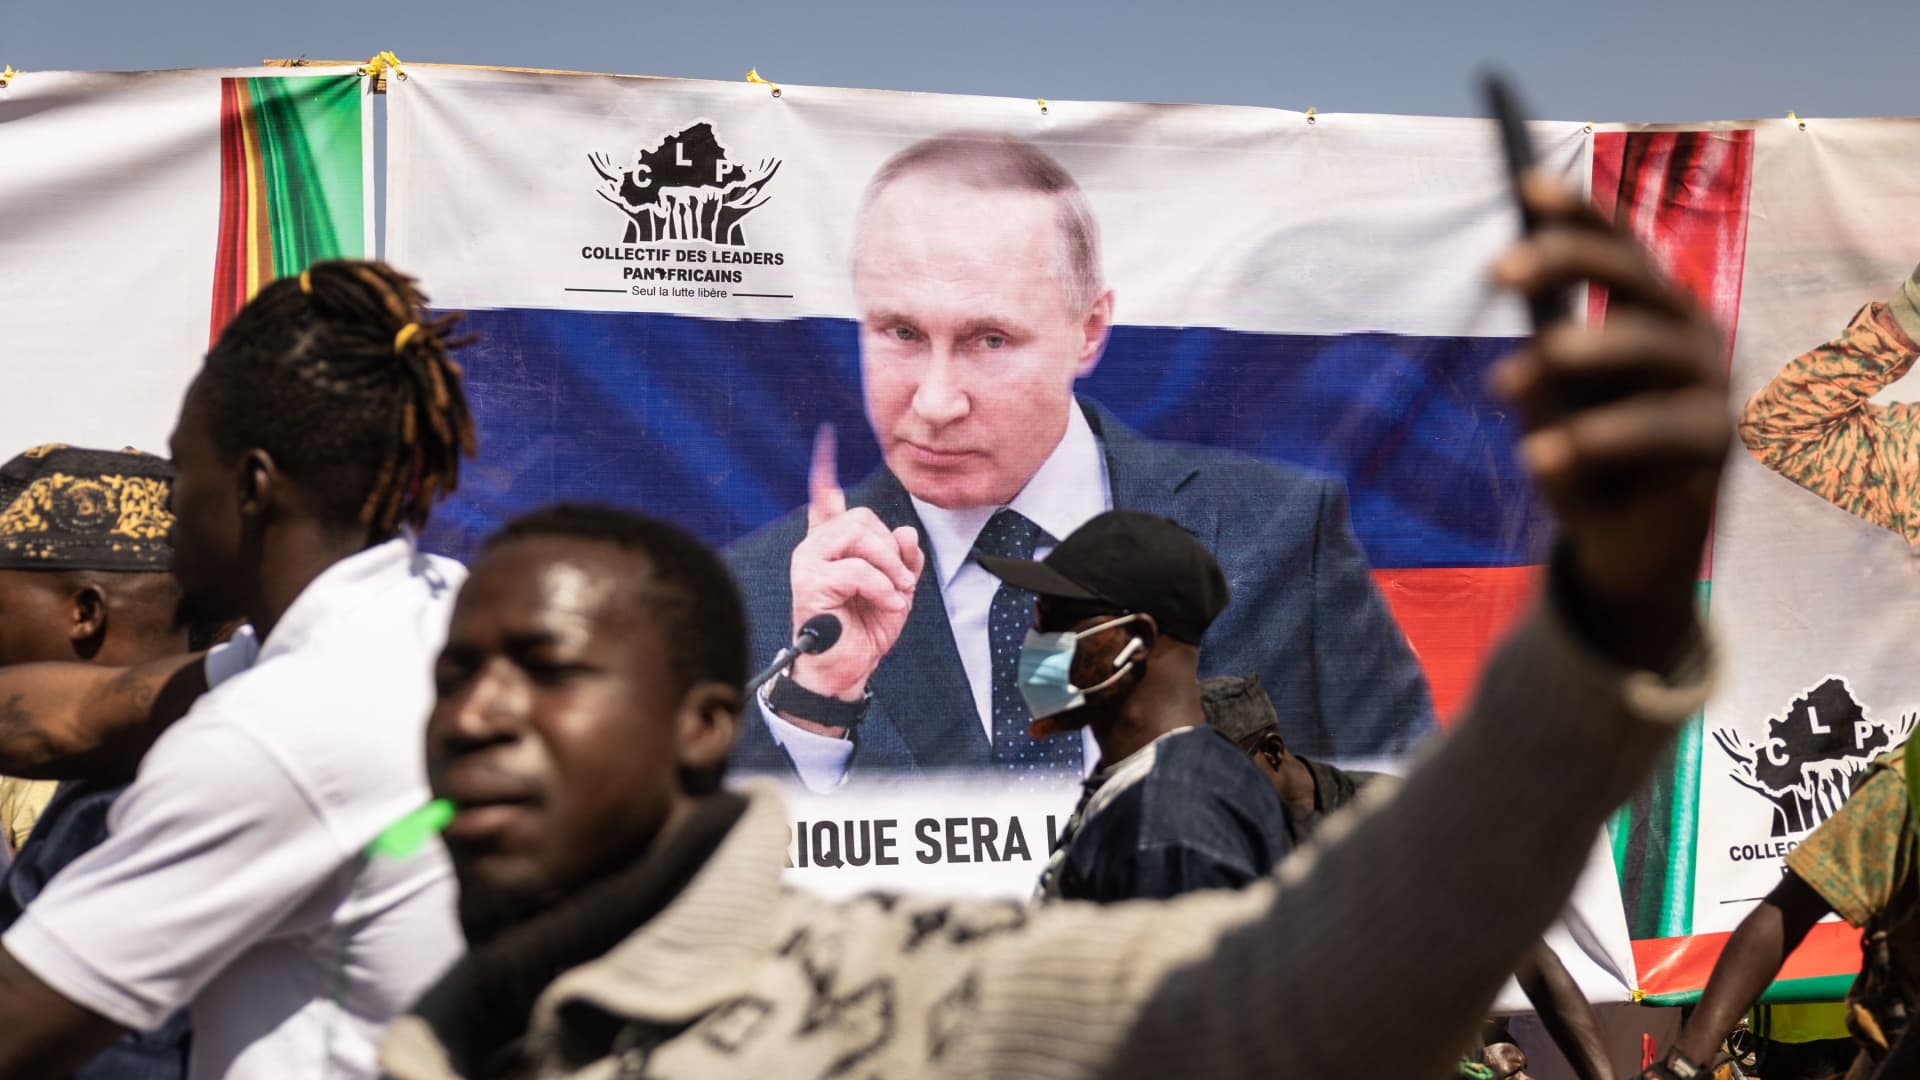 Russia offering African governments ‘regime survival package’ in exchange for resources, research says